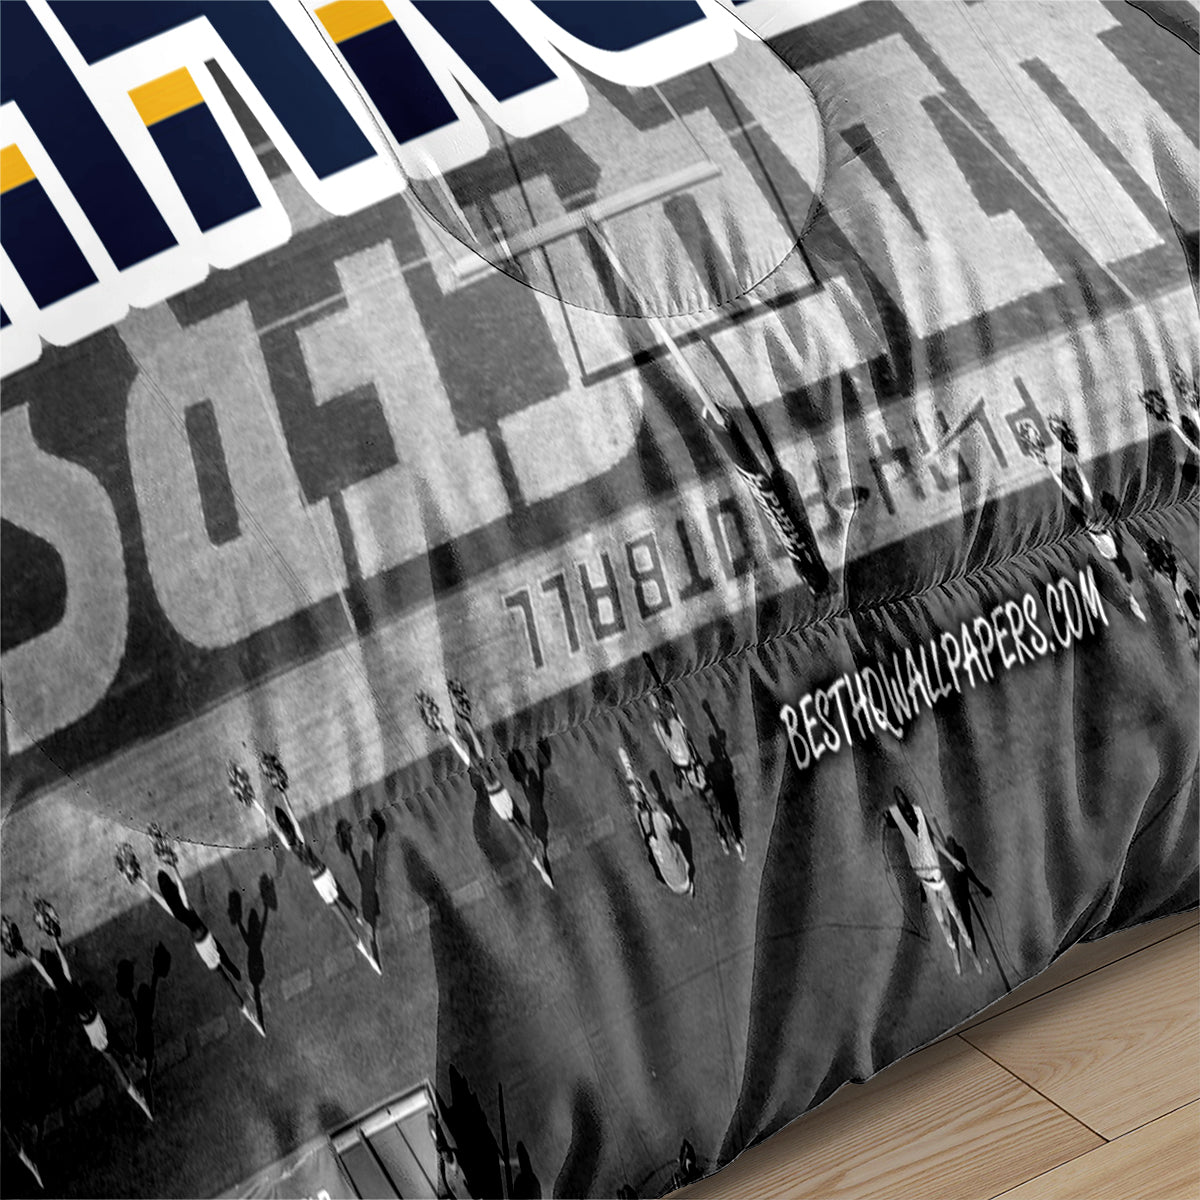 Los Angeles Chargers Football Team Comforter Pillowcase Sets Blanket All Season Reversible Quilted Duvet